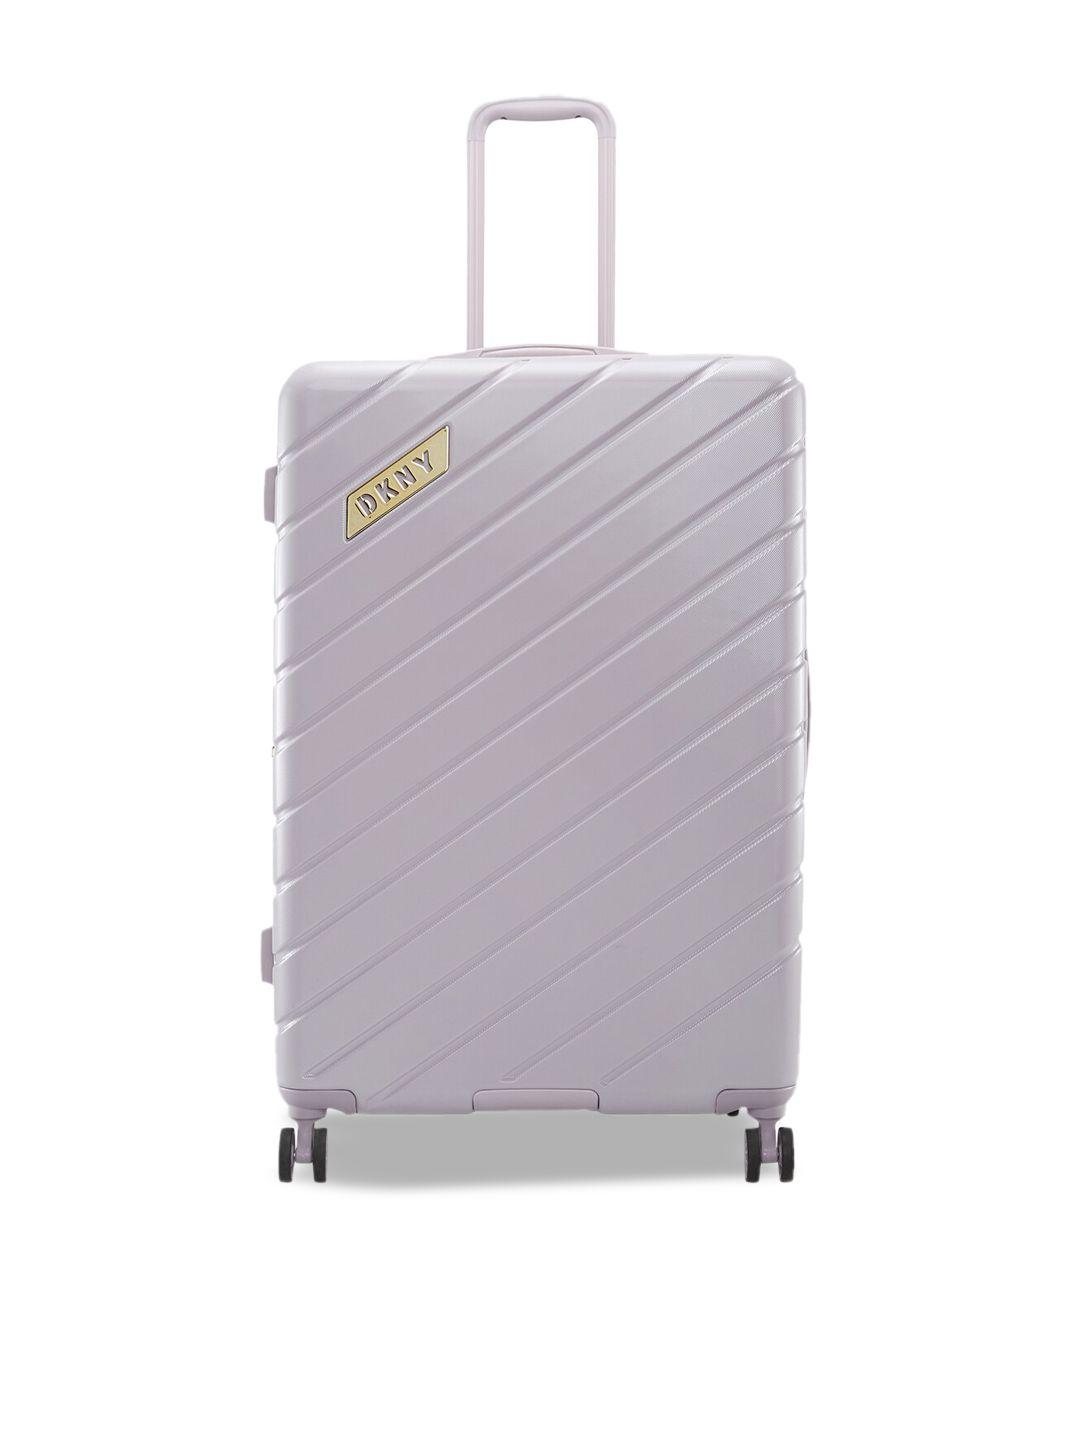 dkny bias textured large  abs trolley suitcase